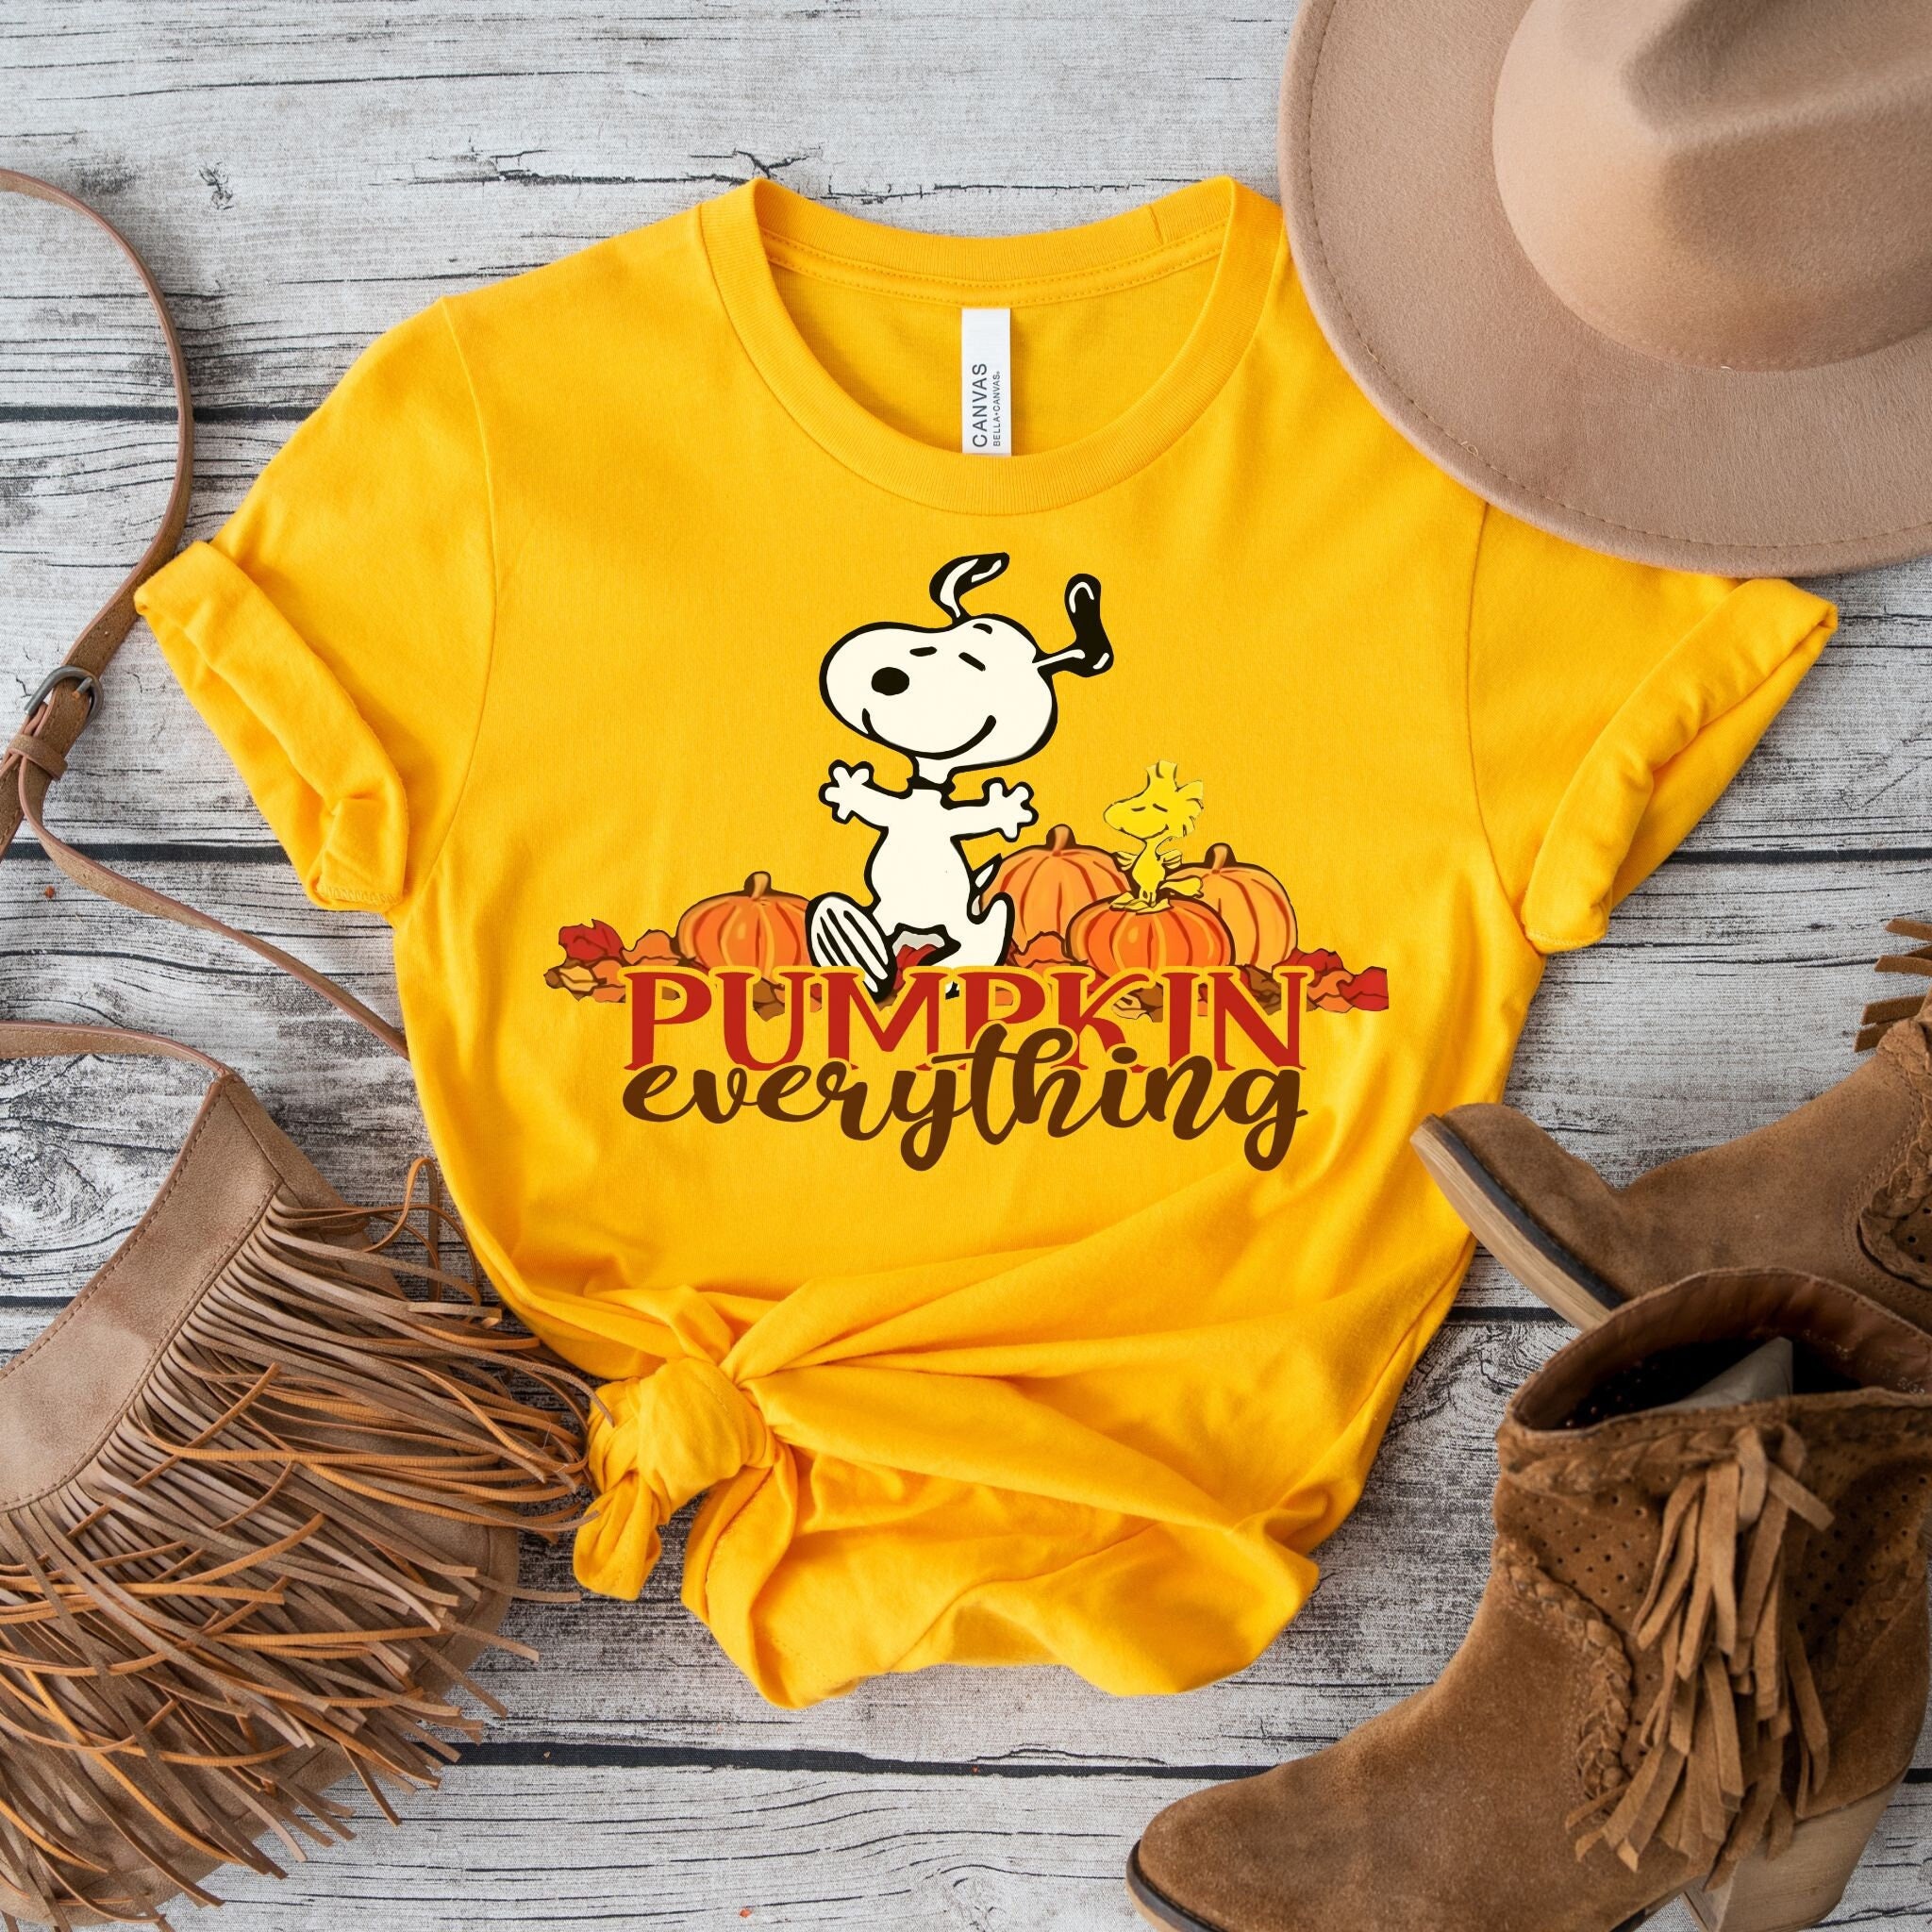 Official snoopy And Woodstock Just A Girl Who Lover Christmas And Love Utah  Jazz Shirt, hoodie, sweater, long sleeve and tank top